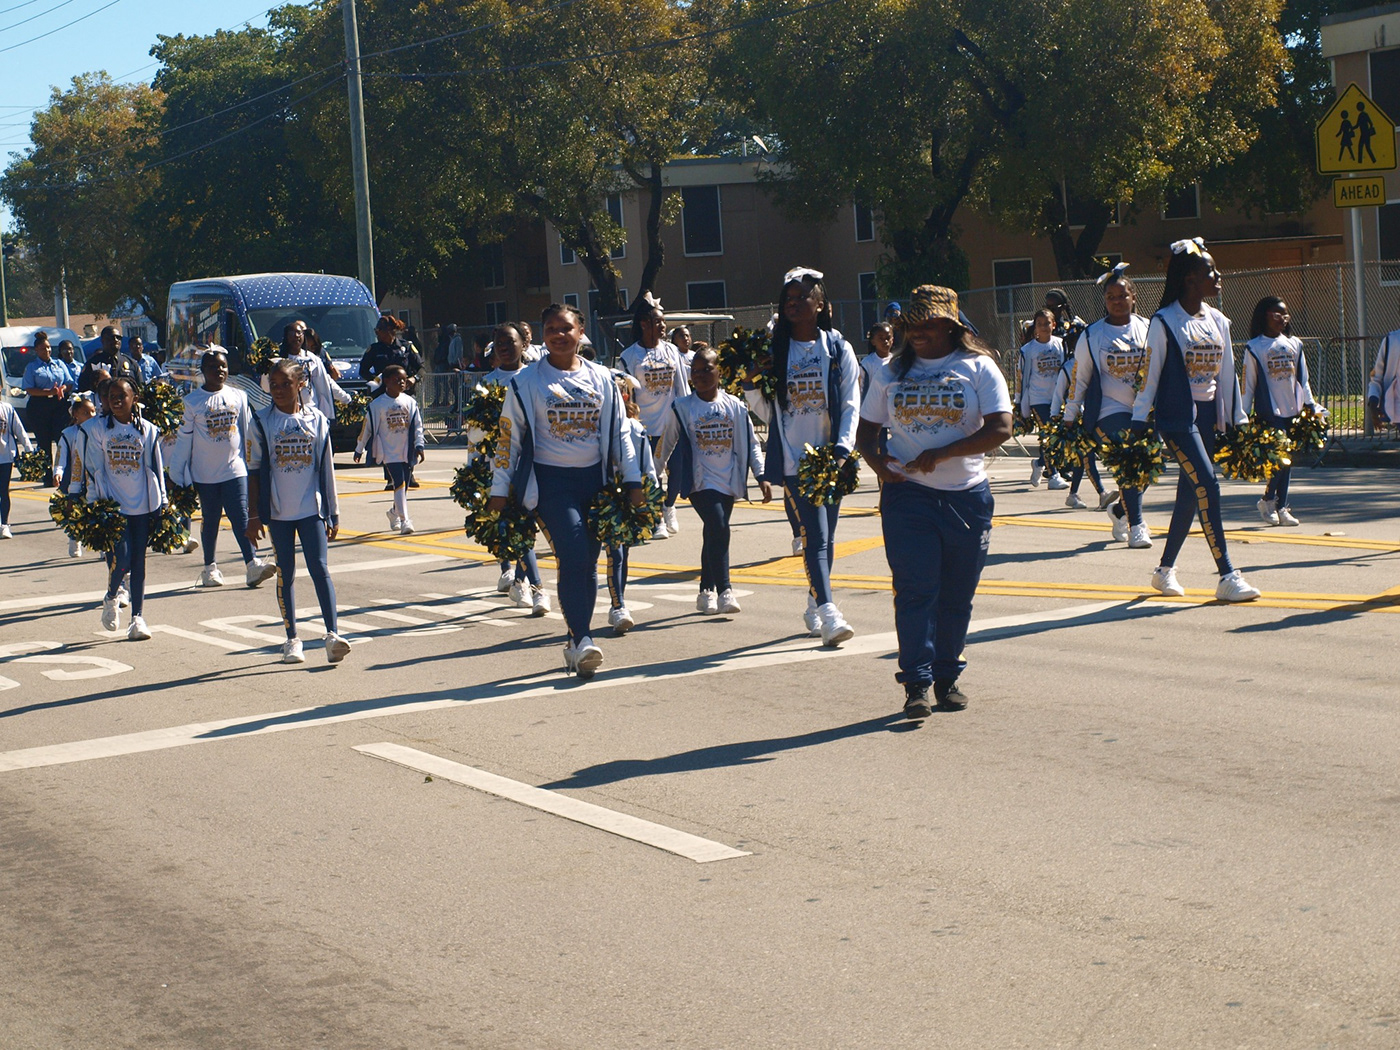 martin luther king jr parade miami jubilee scholars south florida community